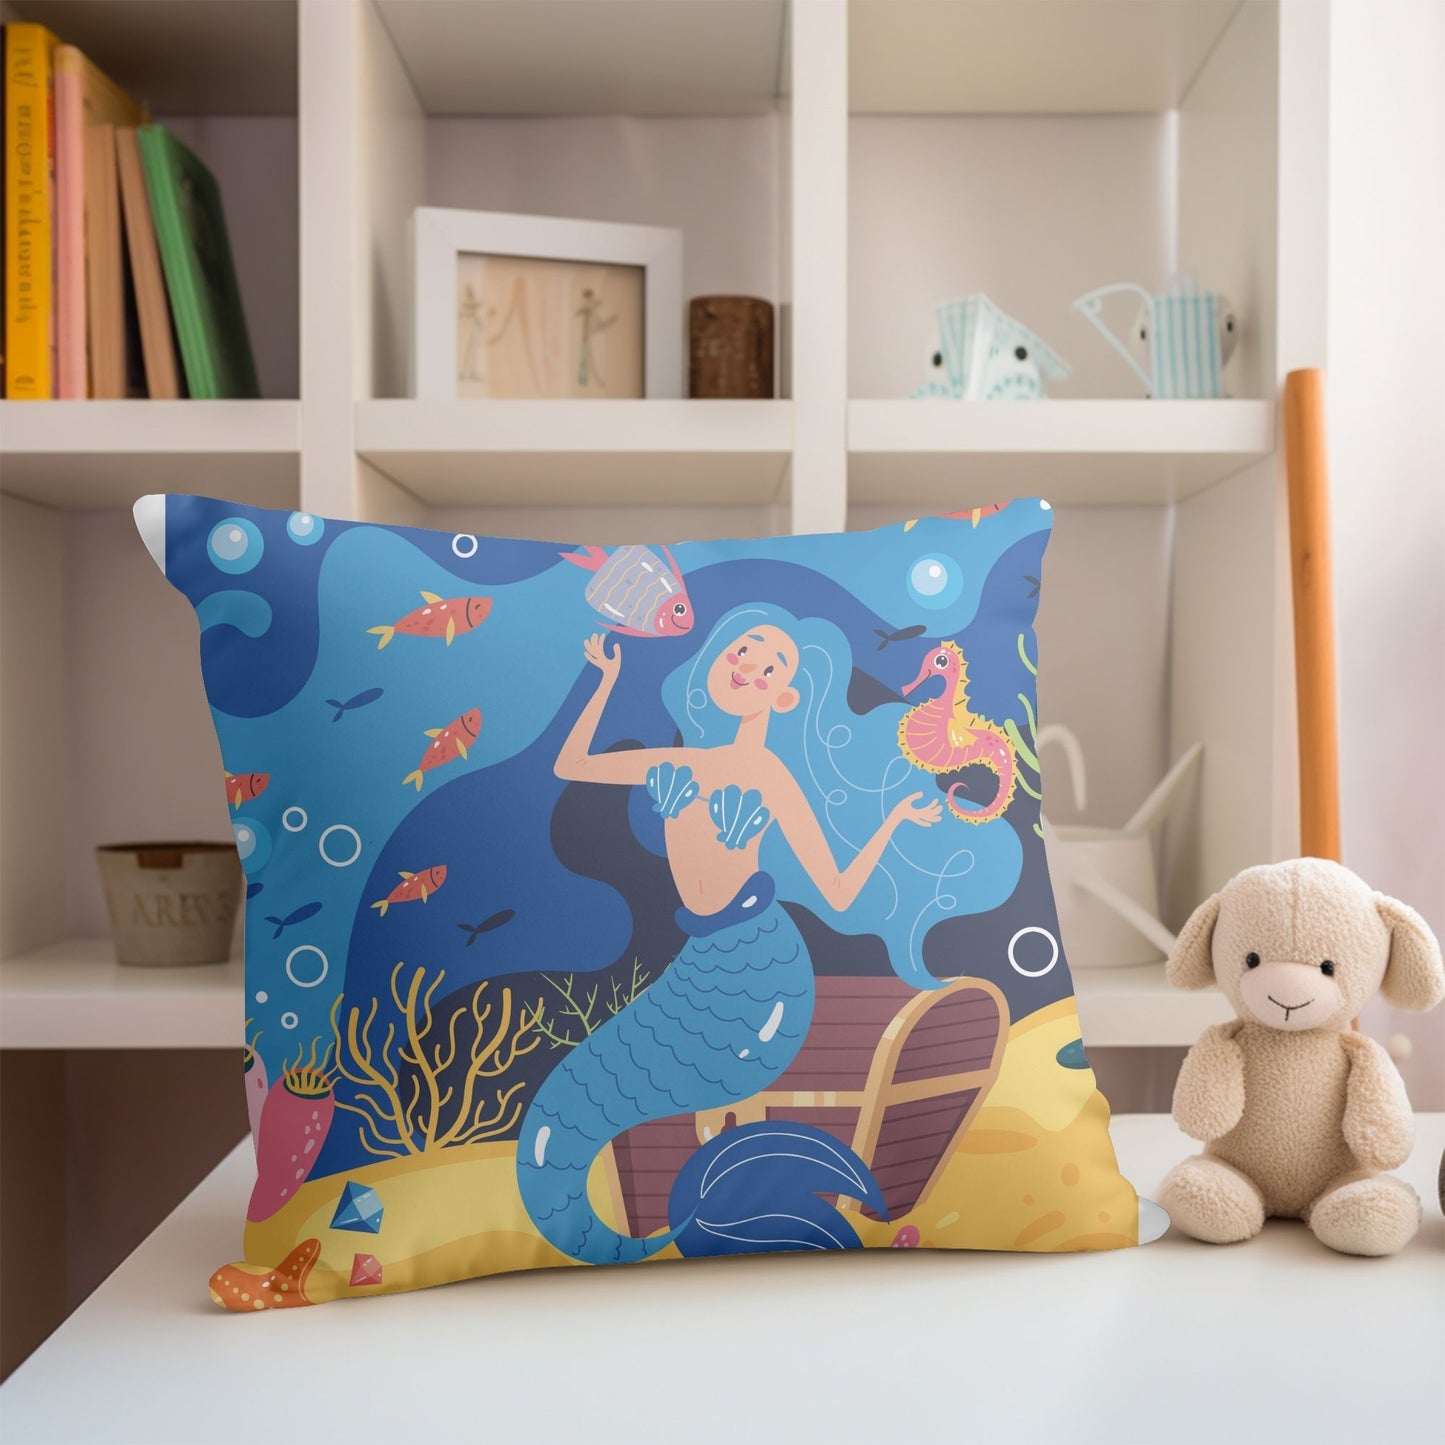 Colorful pillow with an enchanting mermaid pattern for girls' spaces.